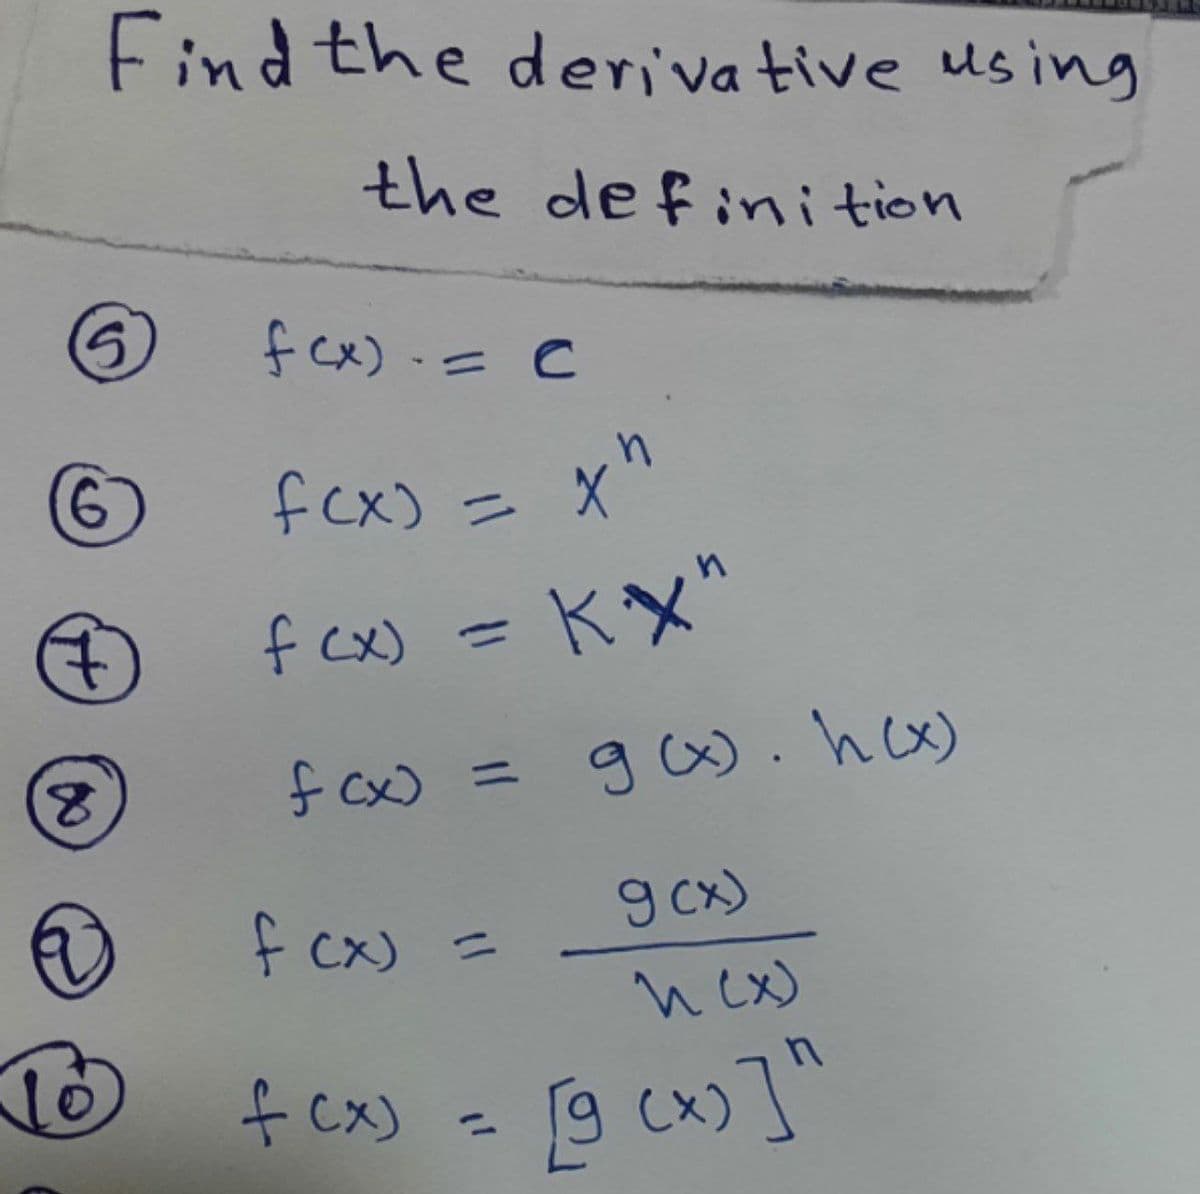 Find the deriva tive using
the de finition
fex).=C
fex) = X"
%3D
f cx) = KX"
%3D
fcx)
gw.hcx)
ニ
fcx)
) =
9 cx)
nex)
+ Cx) - 四 cx)]
%3D
